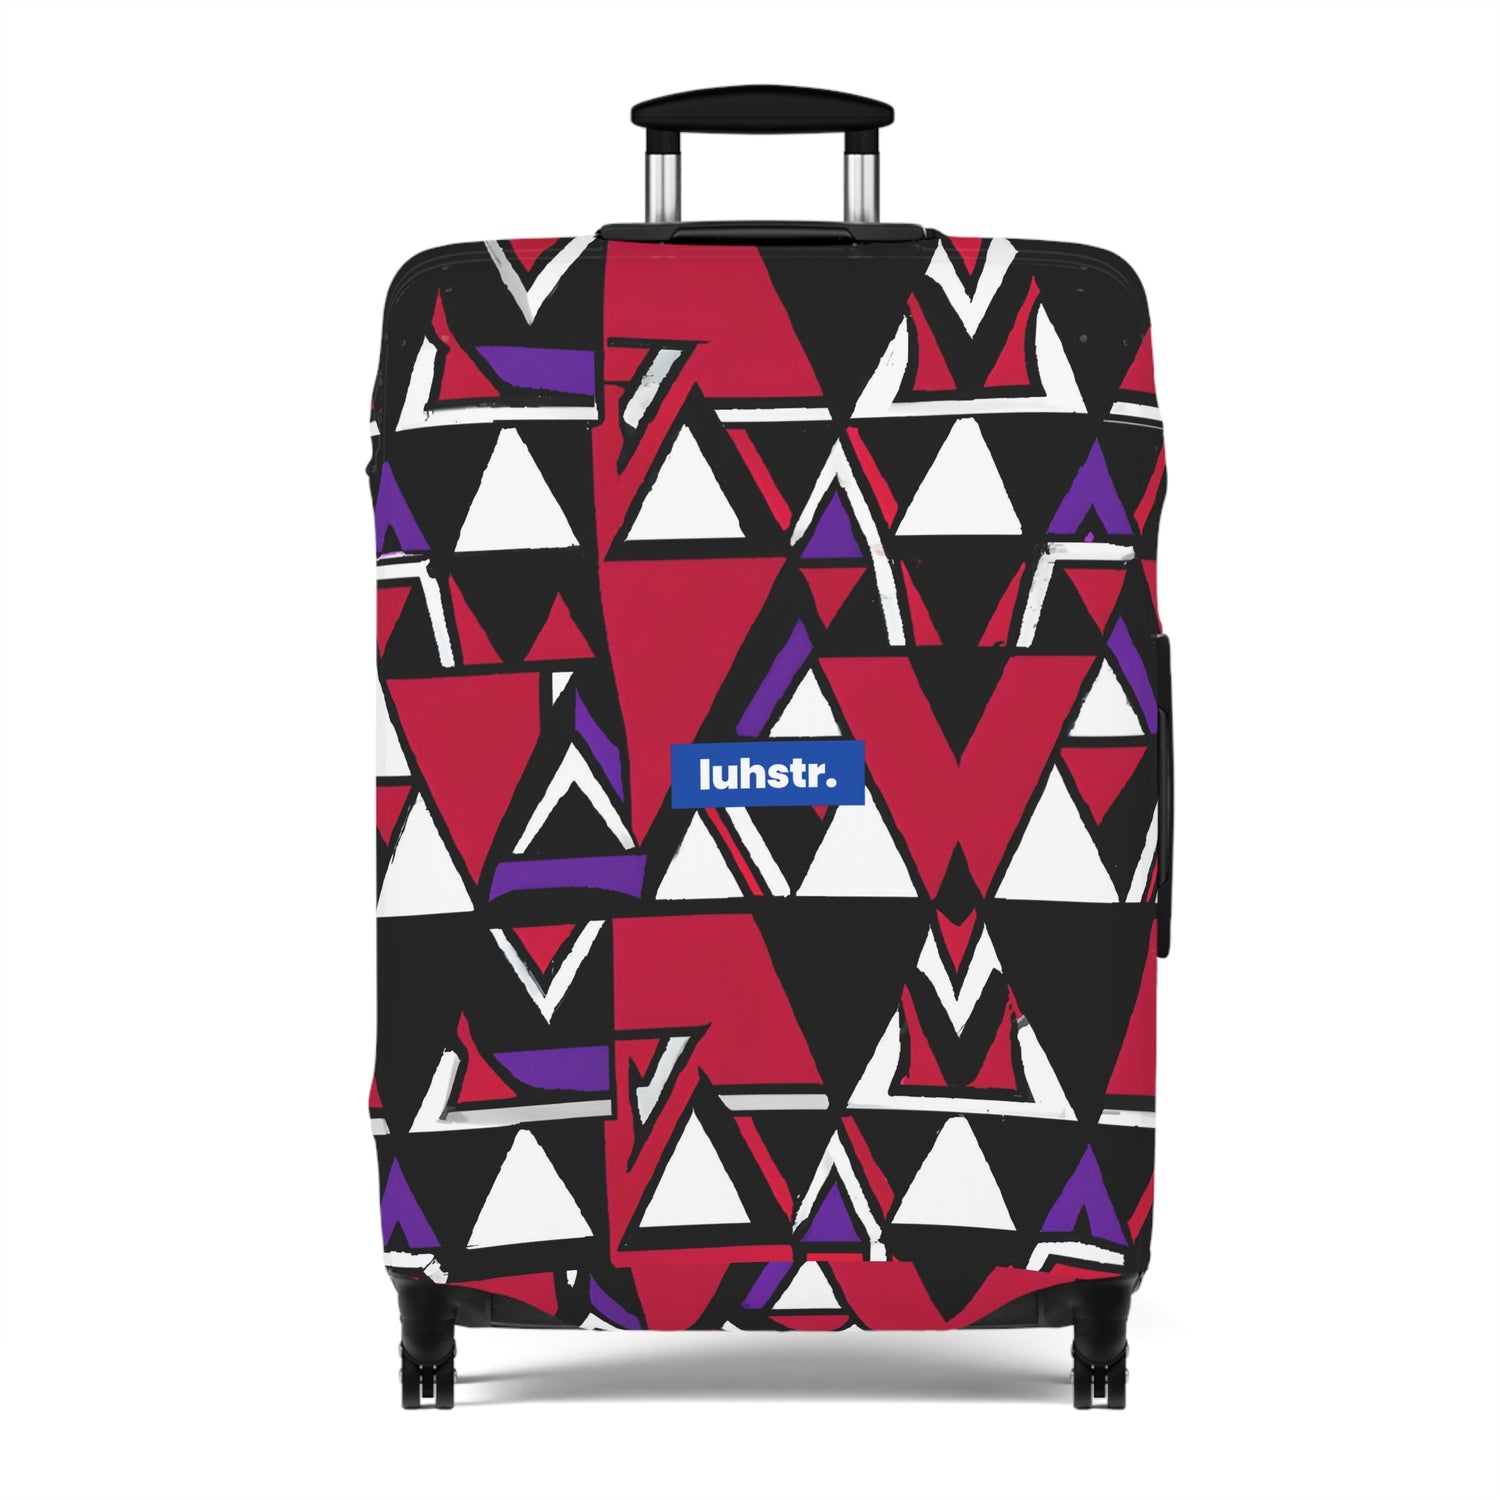 Sunfire Finches - Luggage Cover